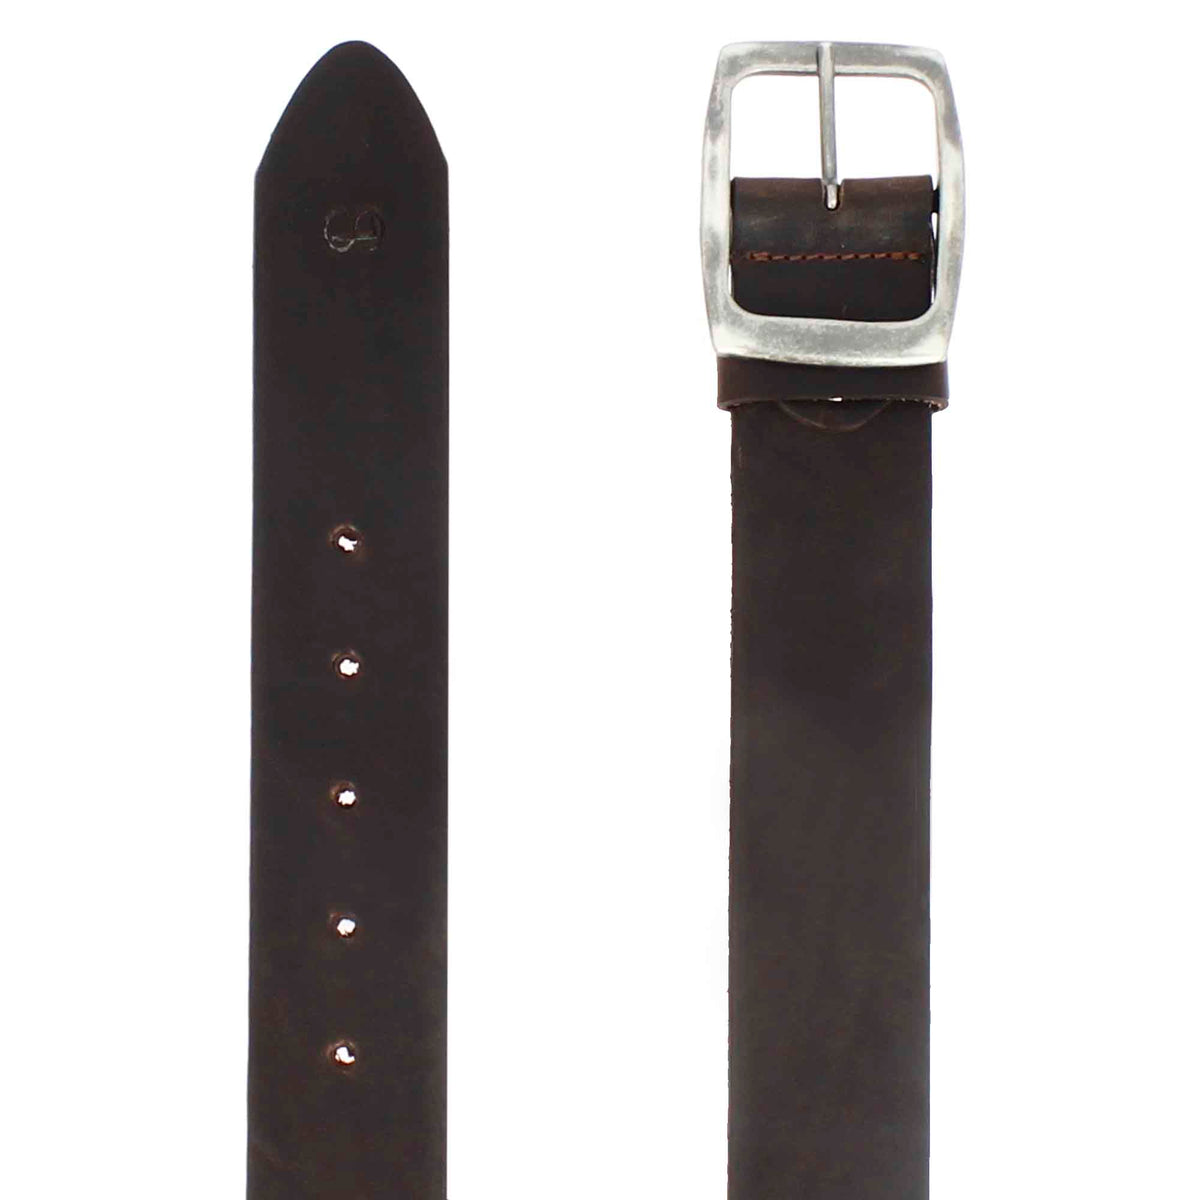 Classic men's belt in dark brown leather with buckle